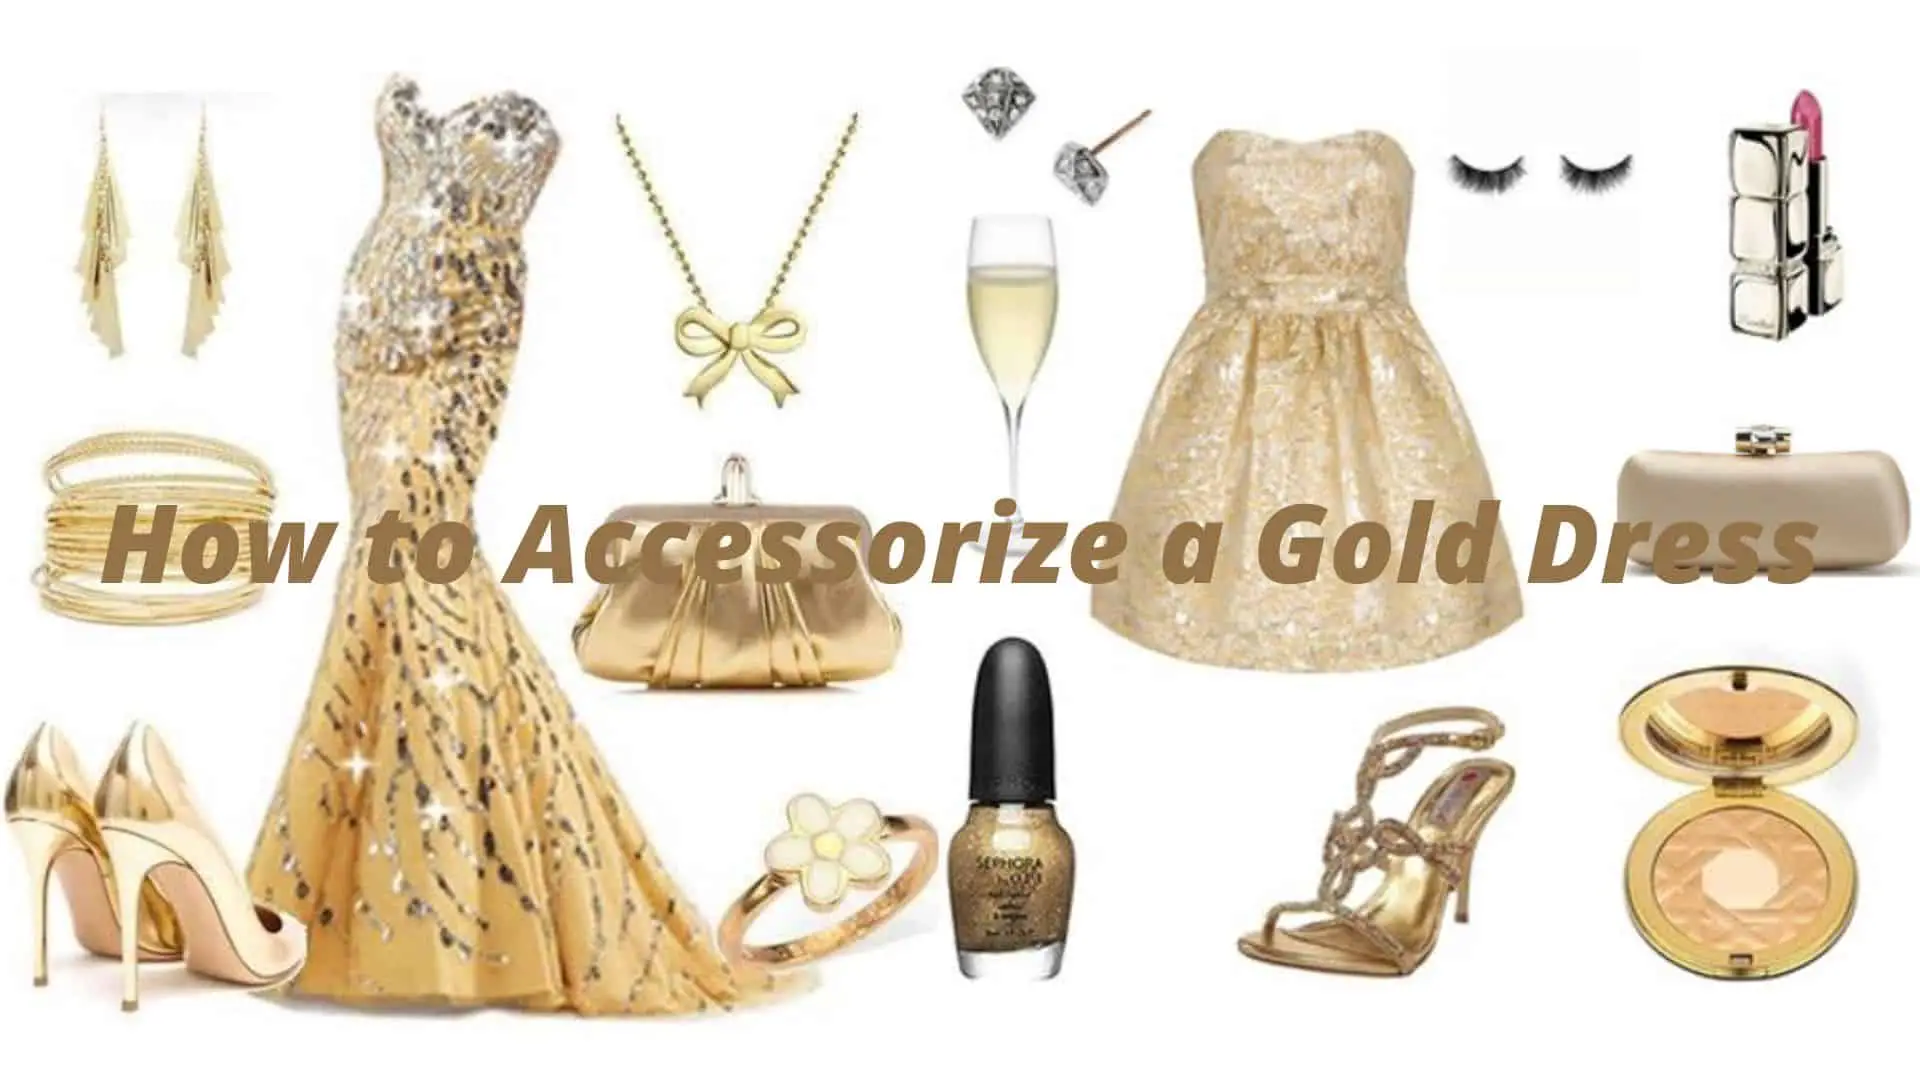 How to Accessorize a Gold Dress